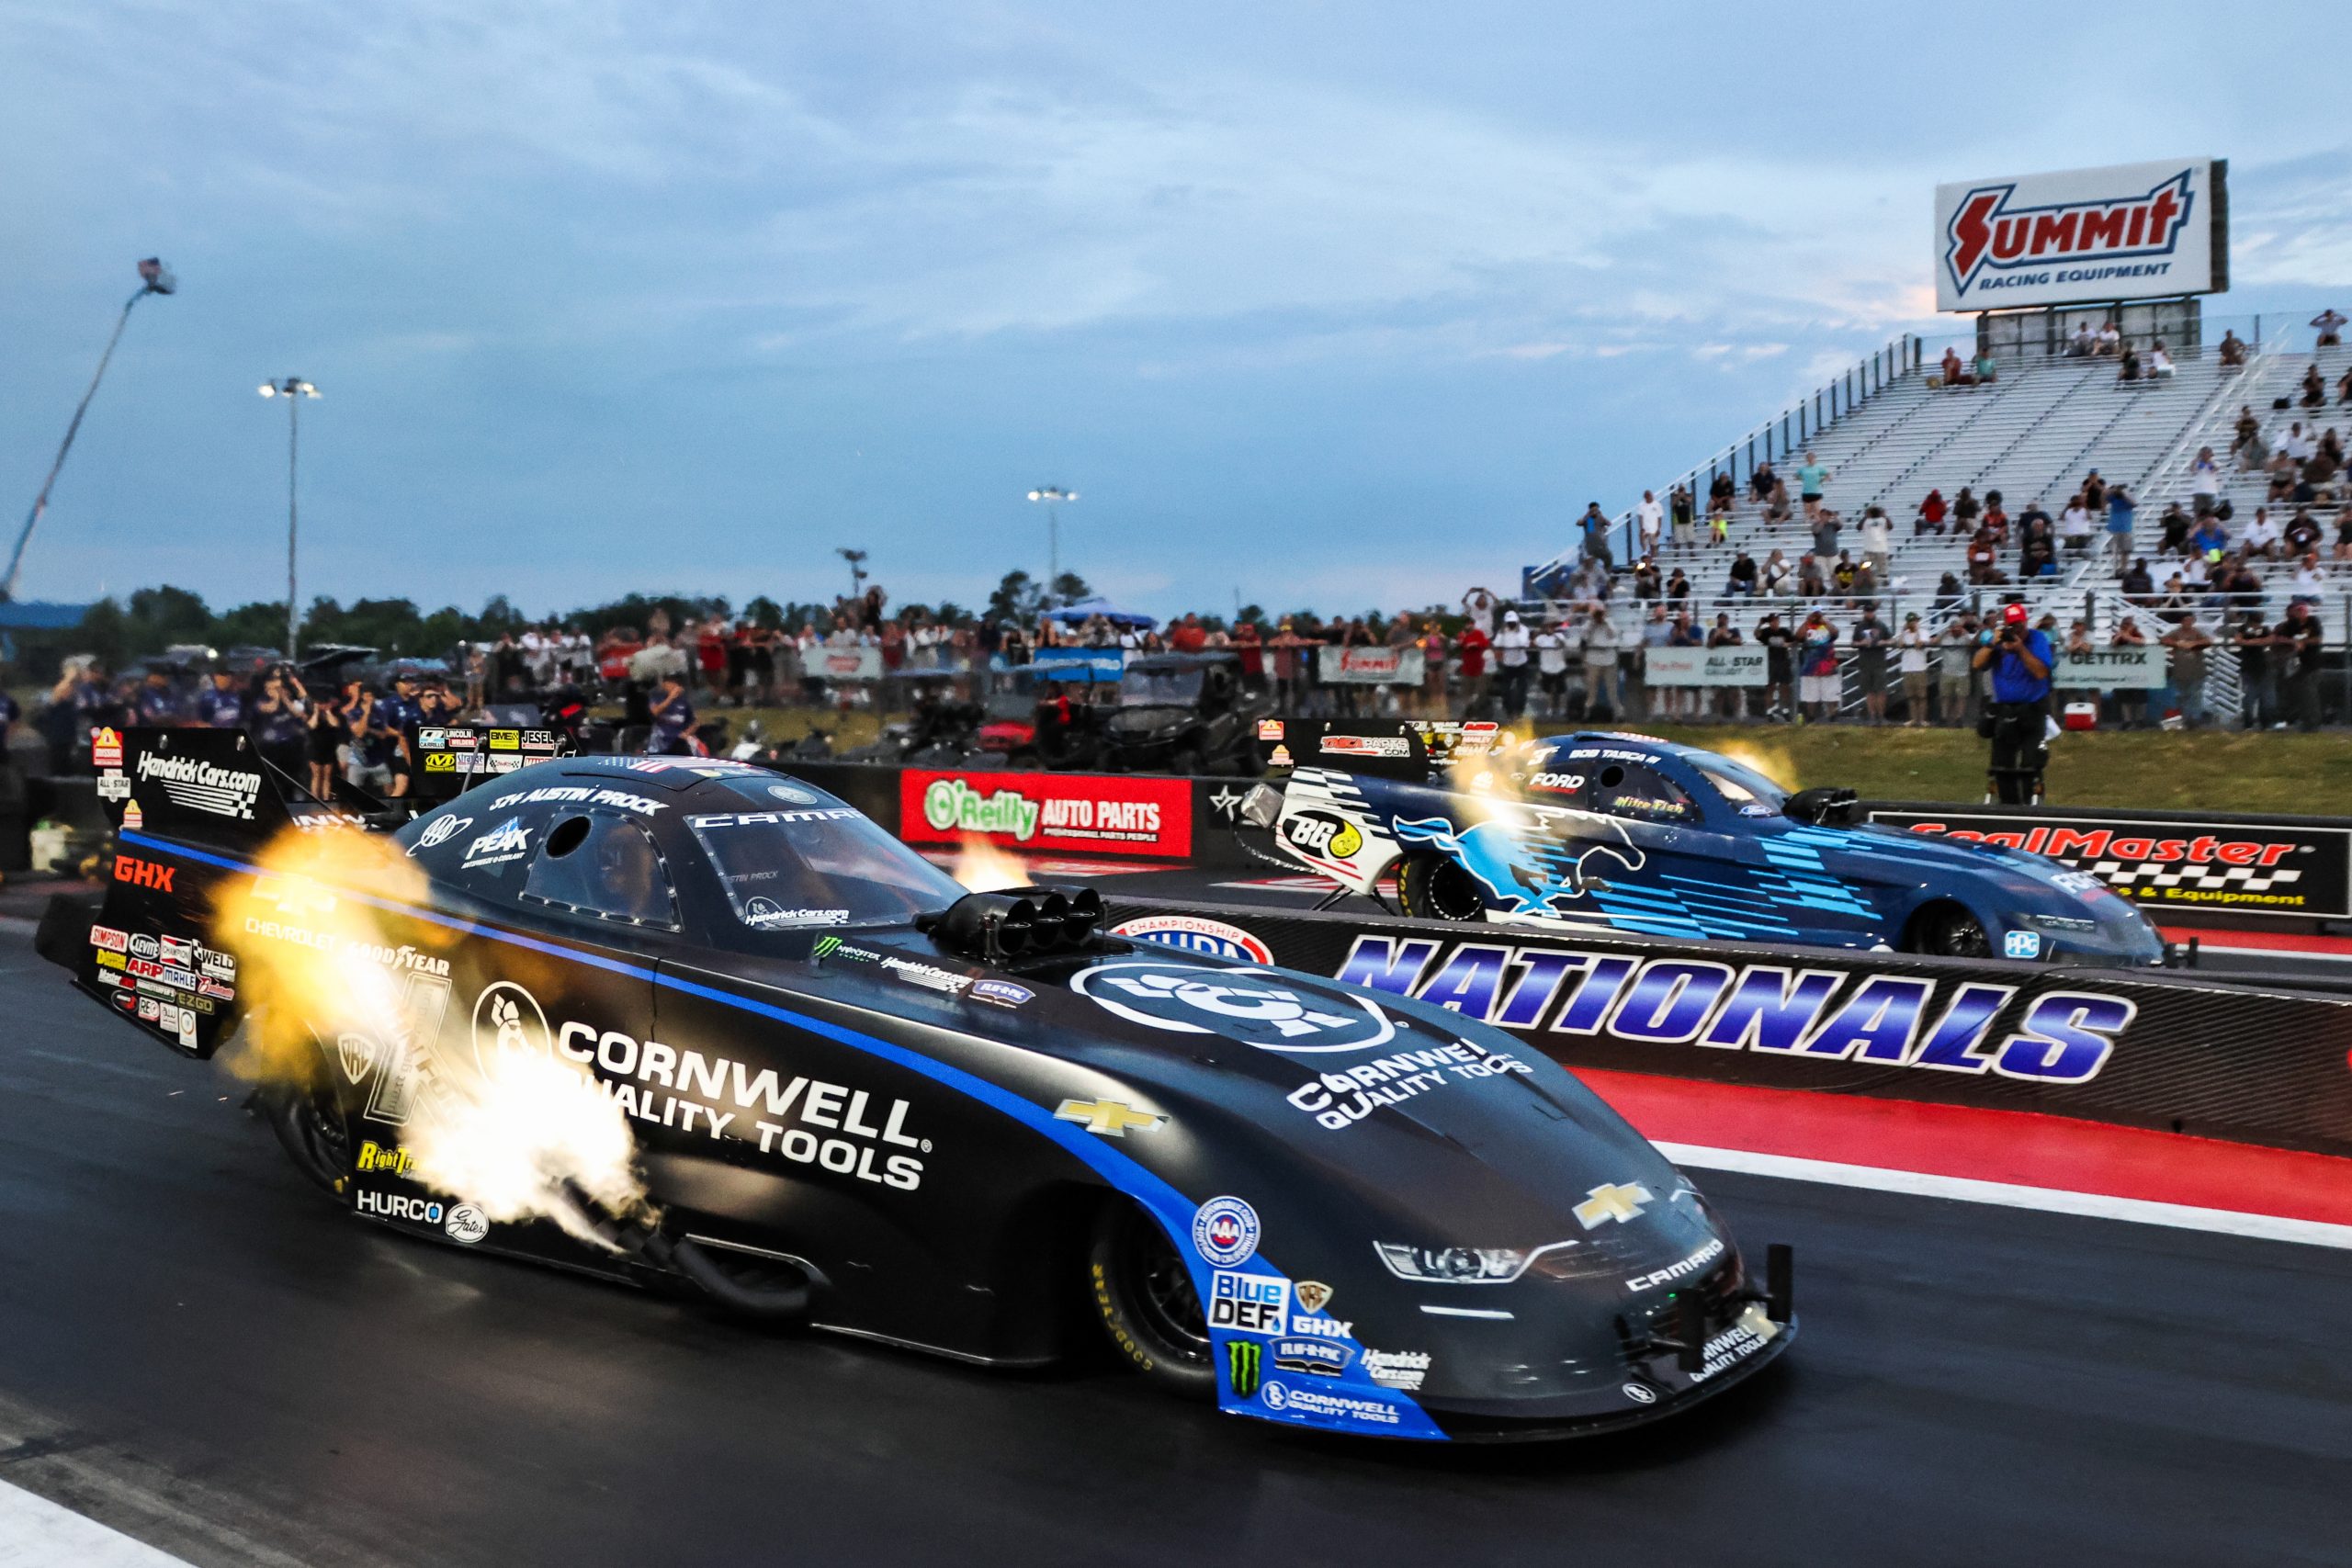 Austin Prock lines up against Bob Tasca in the final round of Funny Car eliminations.